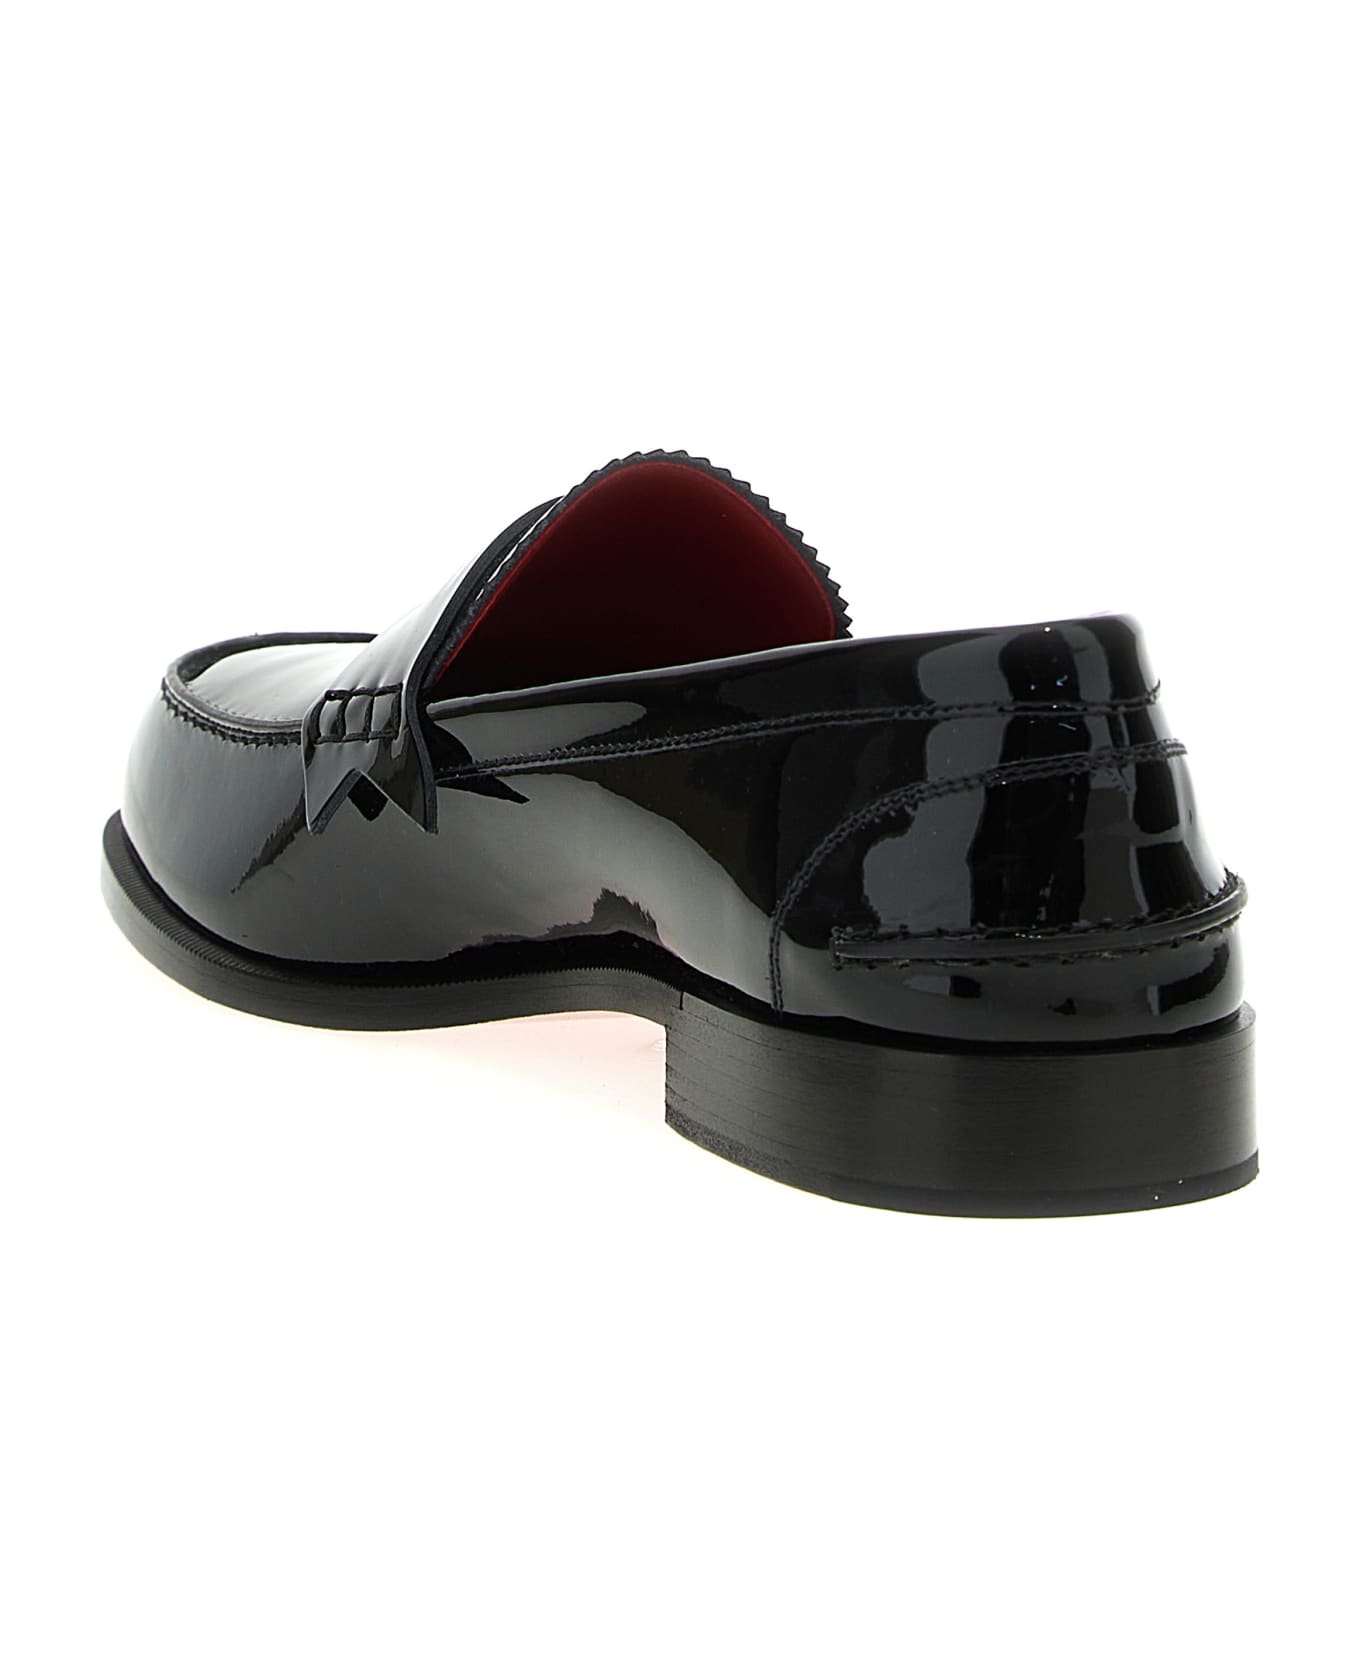 Christian Louboutin 'penny' Loafers - Black  